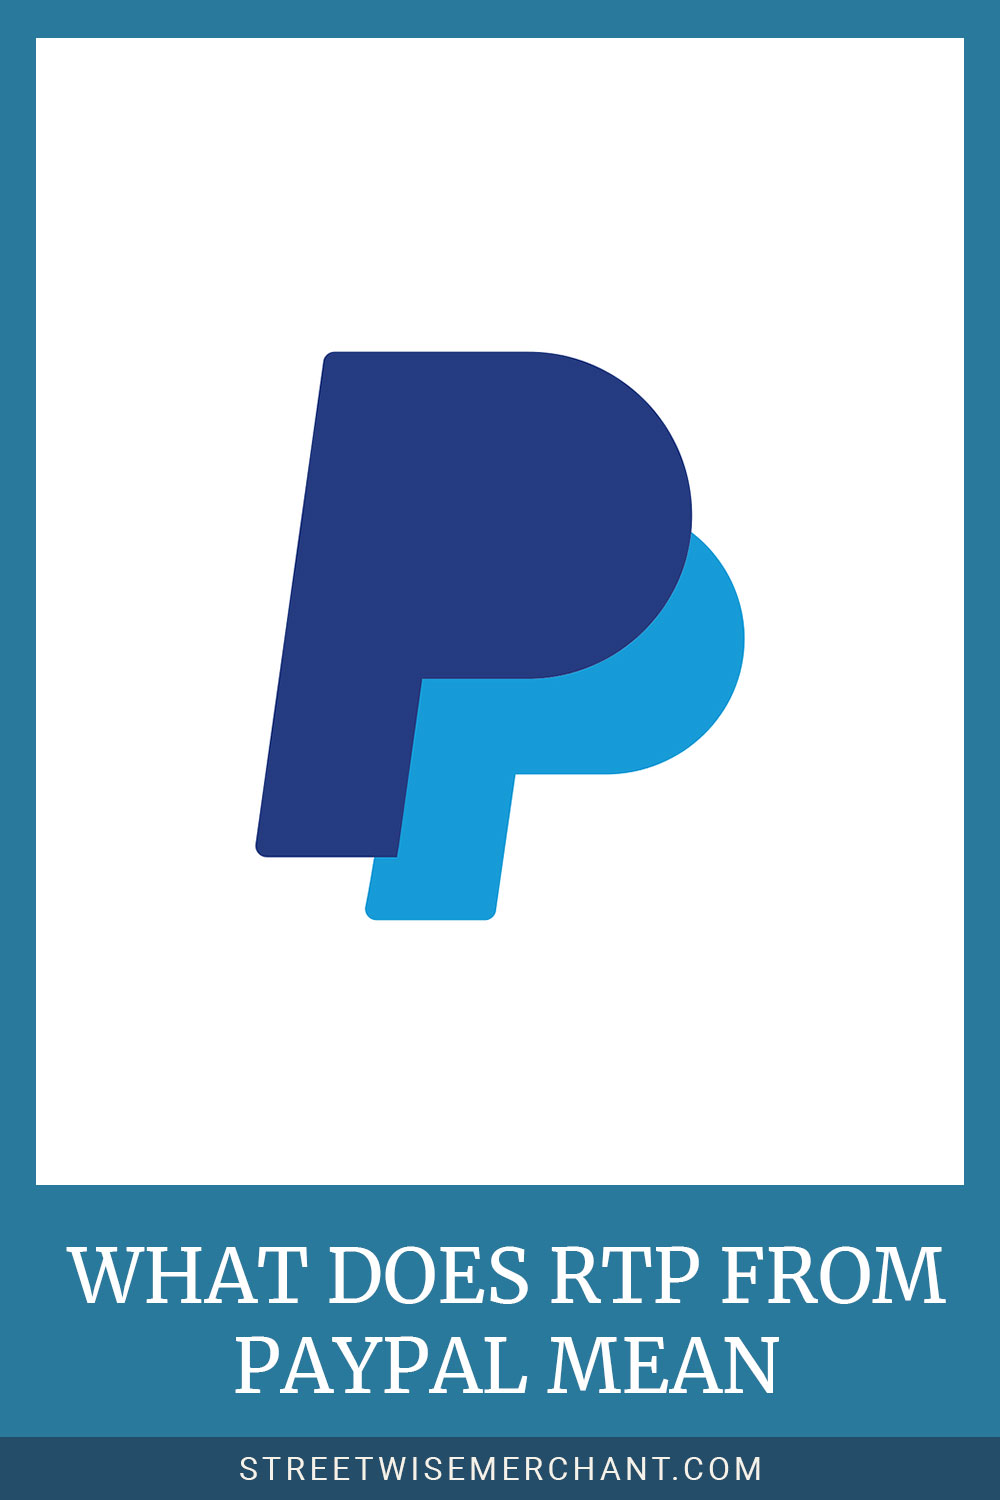 Paypal logo - What Does RTP From Paypal Mean